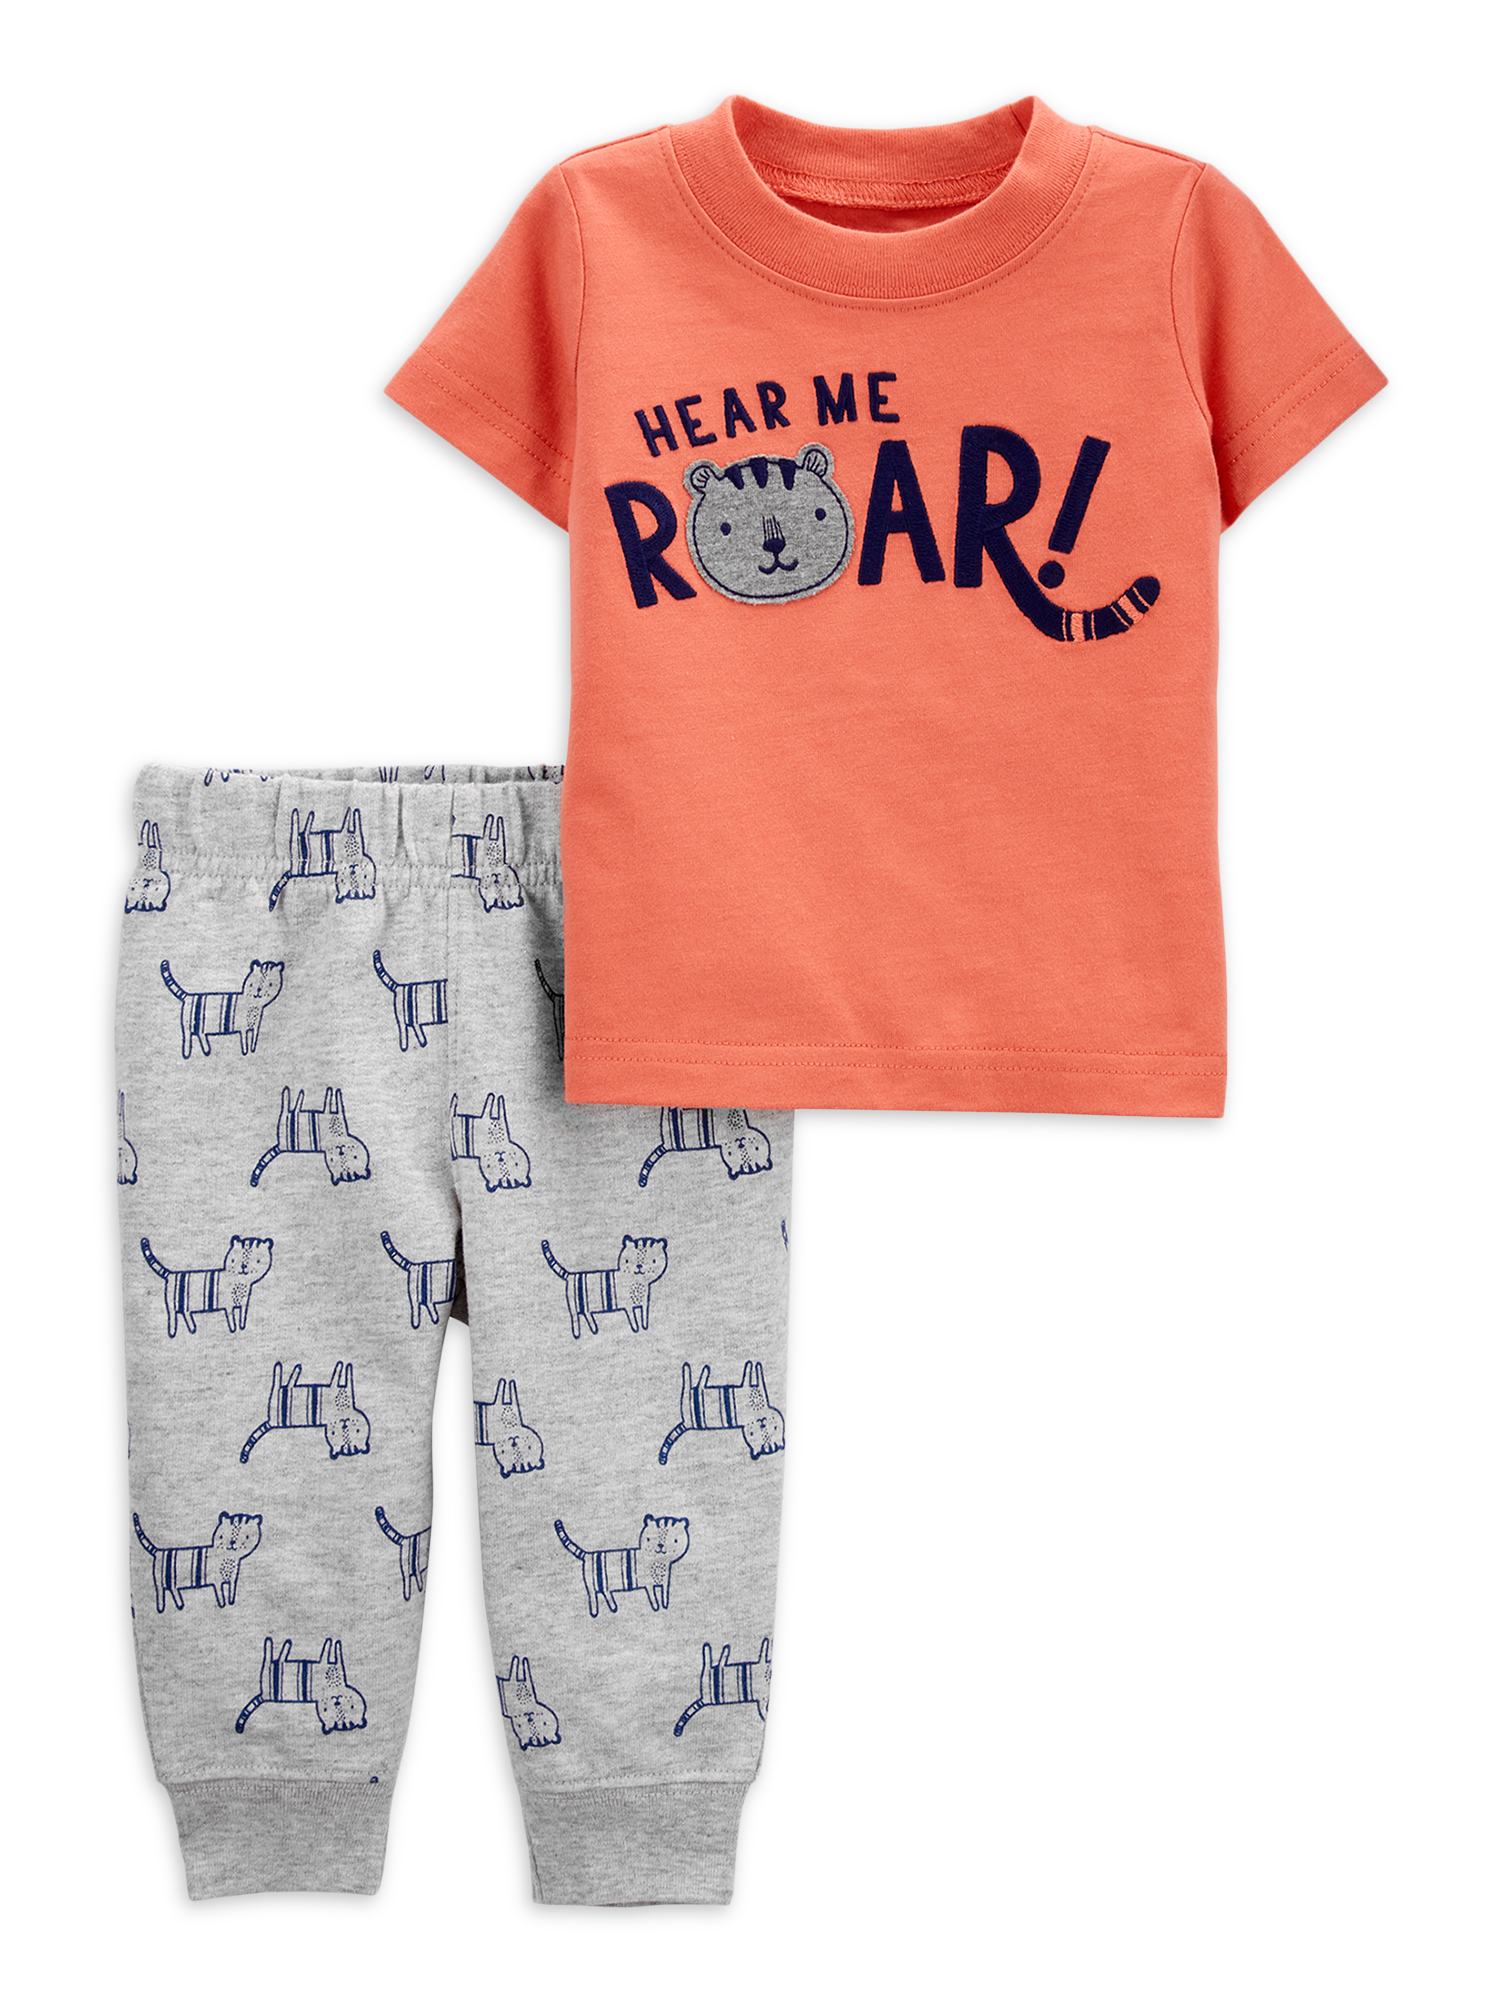 Carter's Child of Mine Toddler Boy Short-Sleeve T-shirt & Jogger Pant Outfit Set, 2-Piece, 2T-5T - image 1 of 2